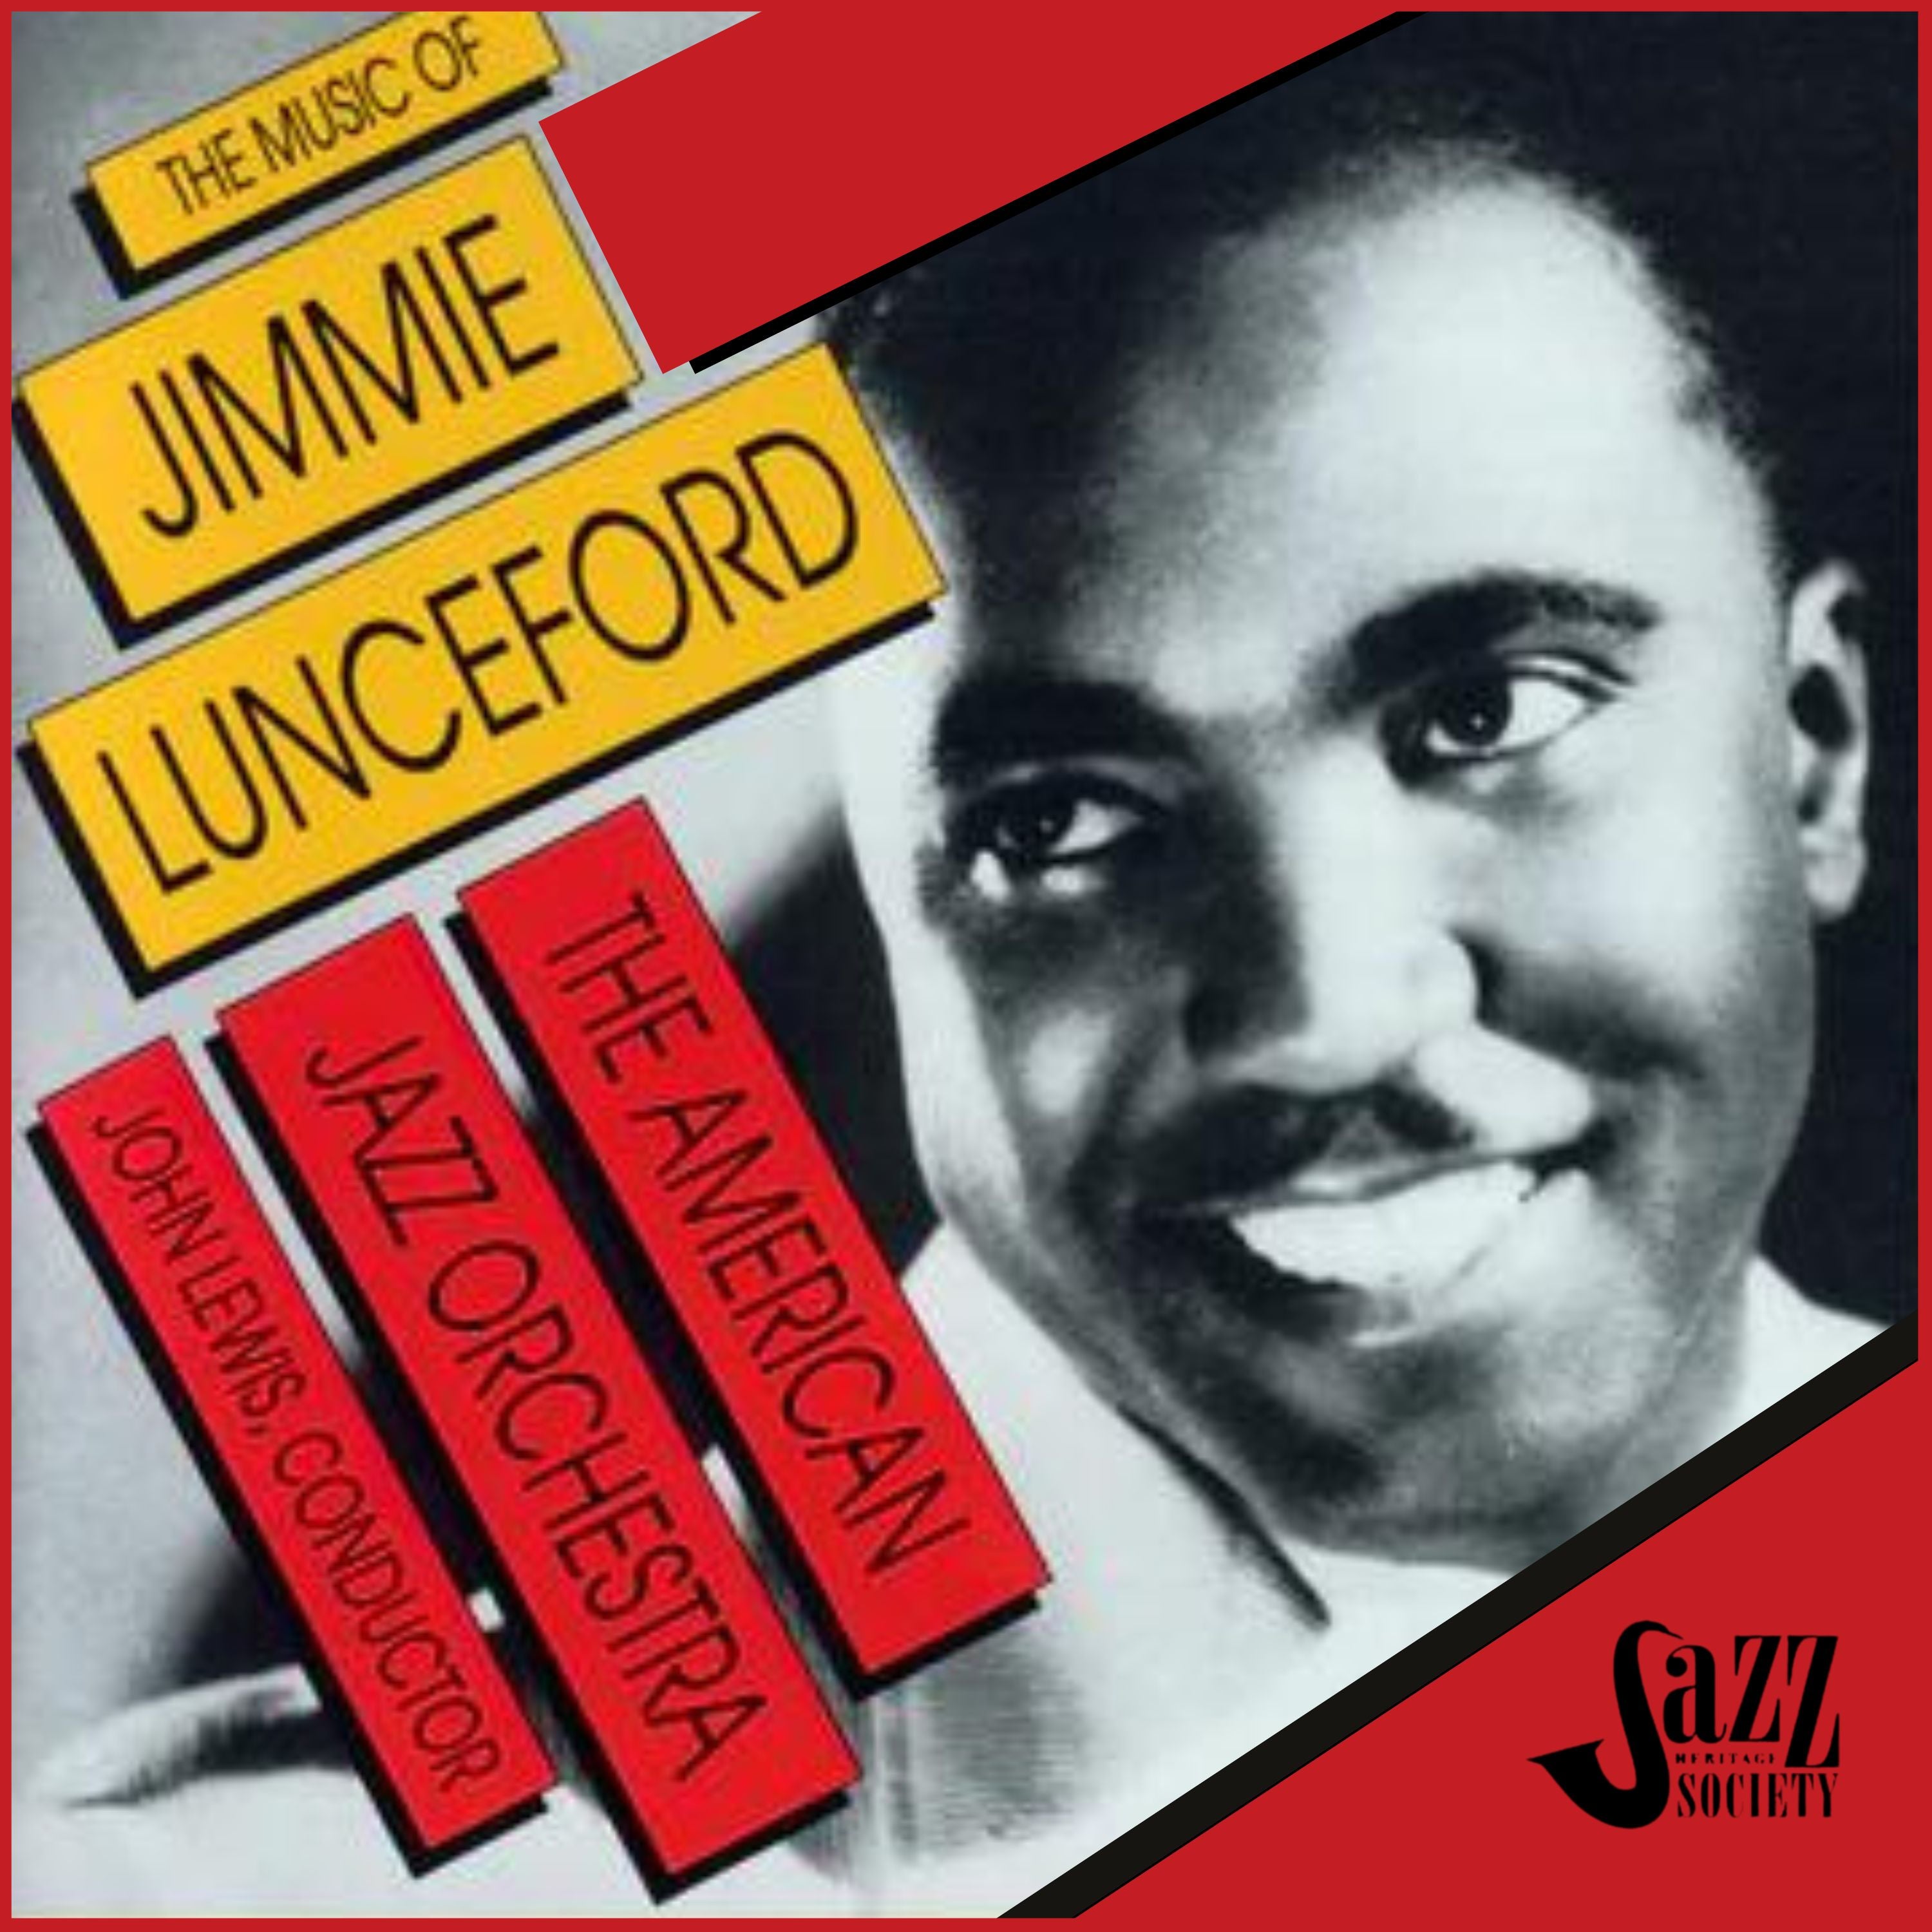 John Lewis & The American Jazz Orchestra: The Music of Jimmie Lunceford